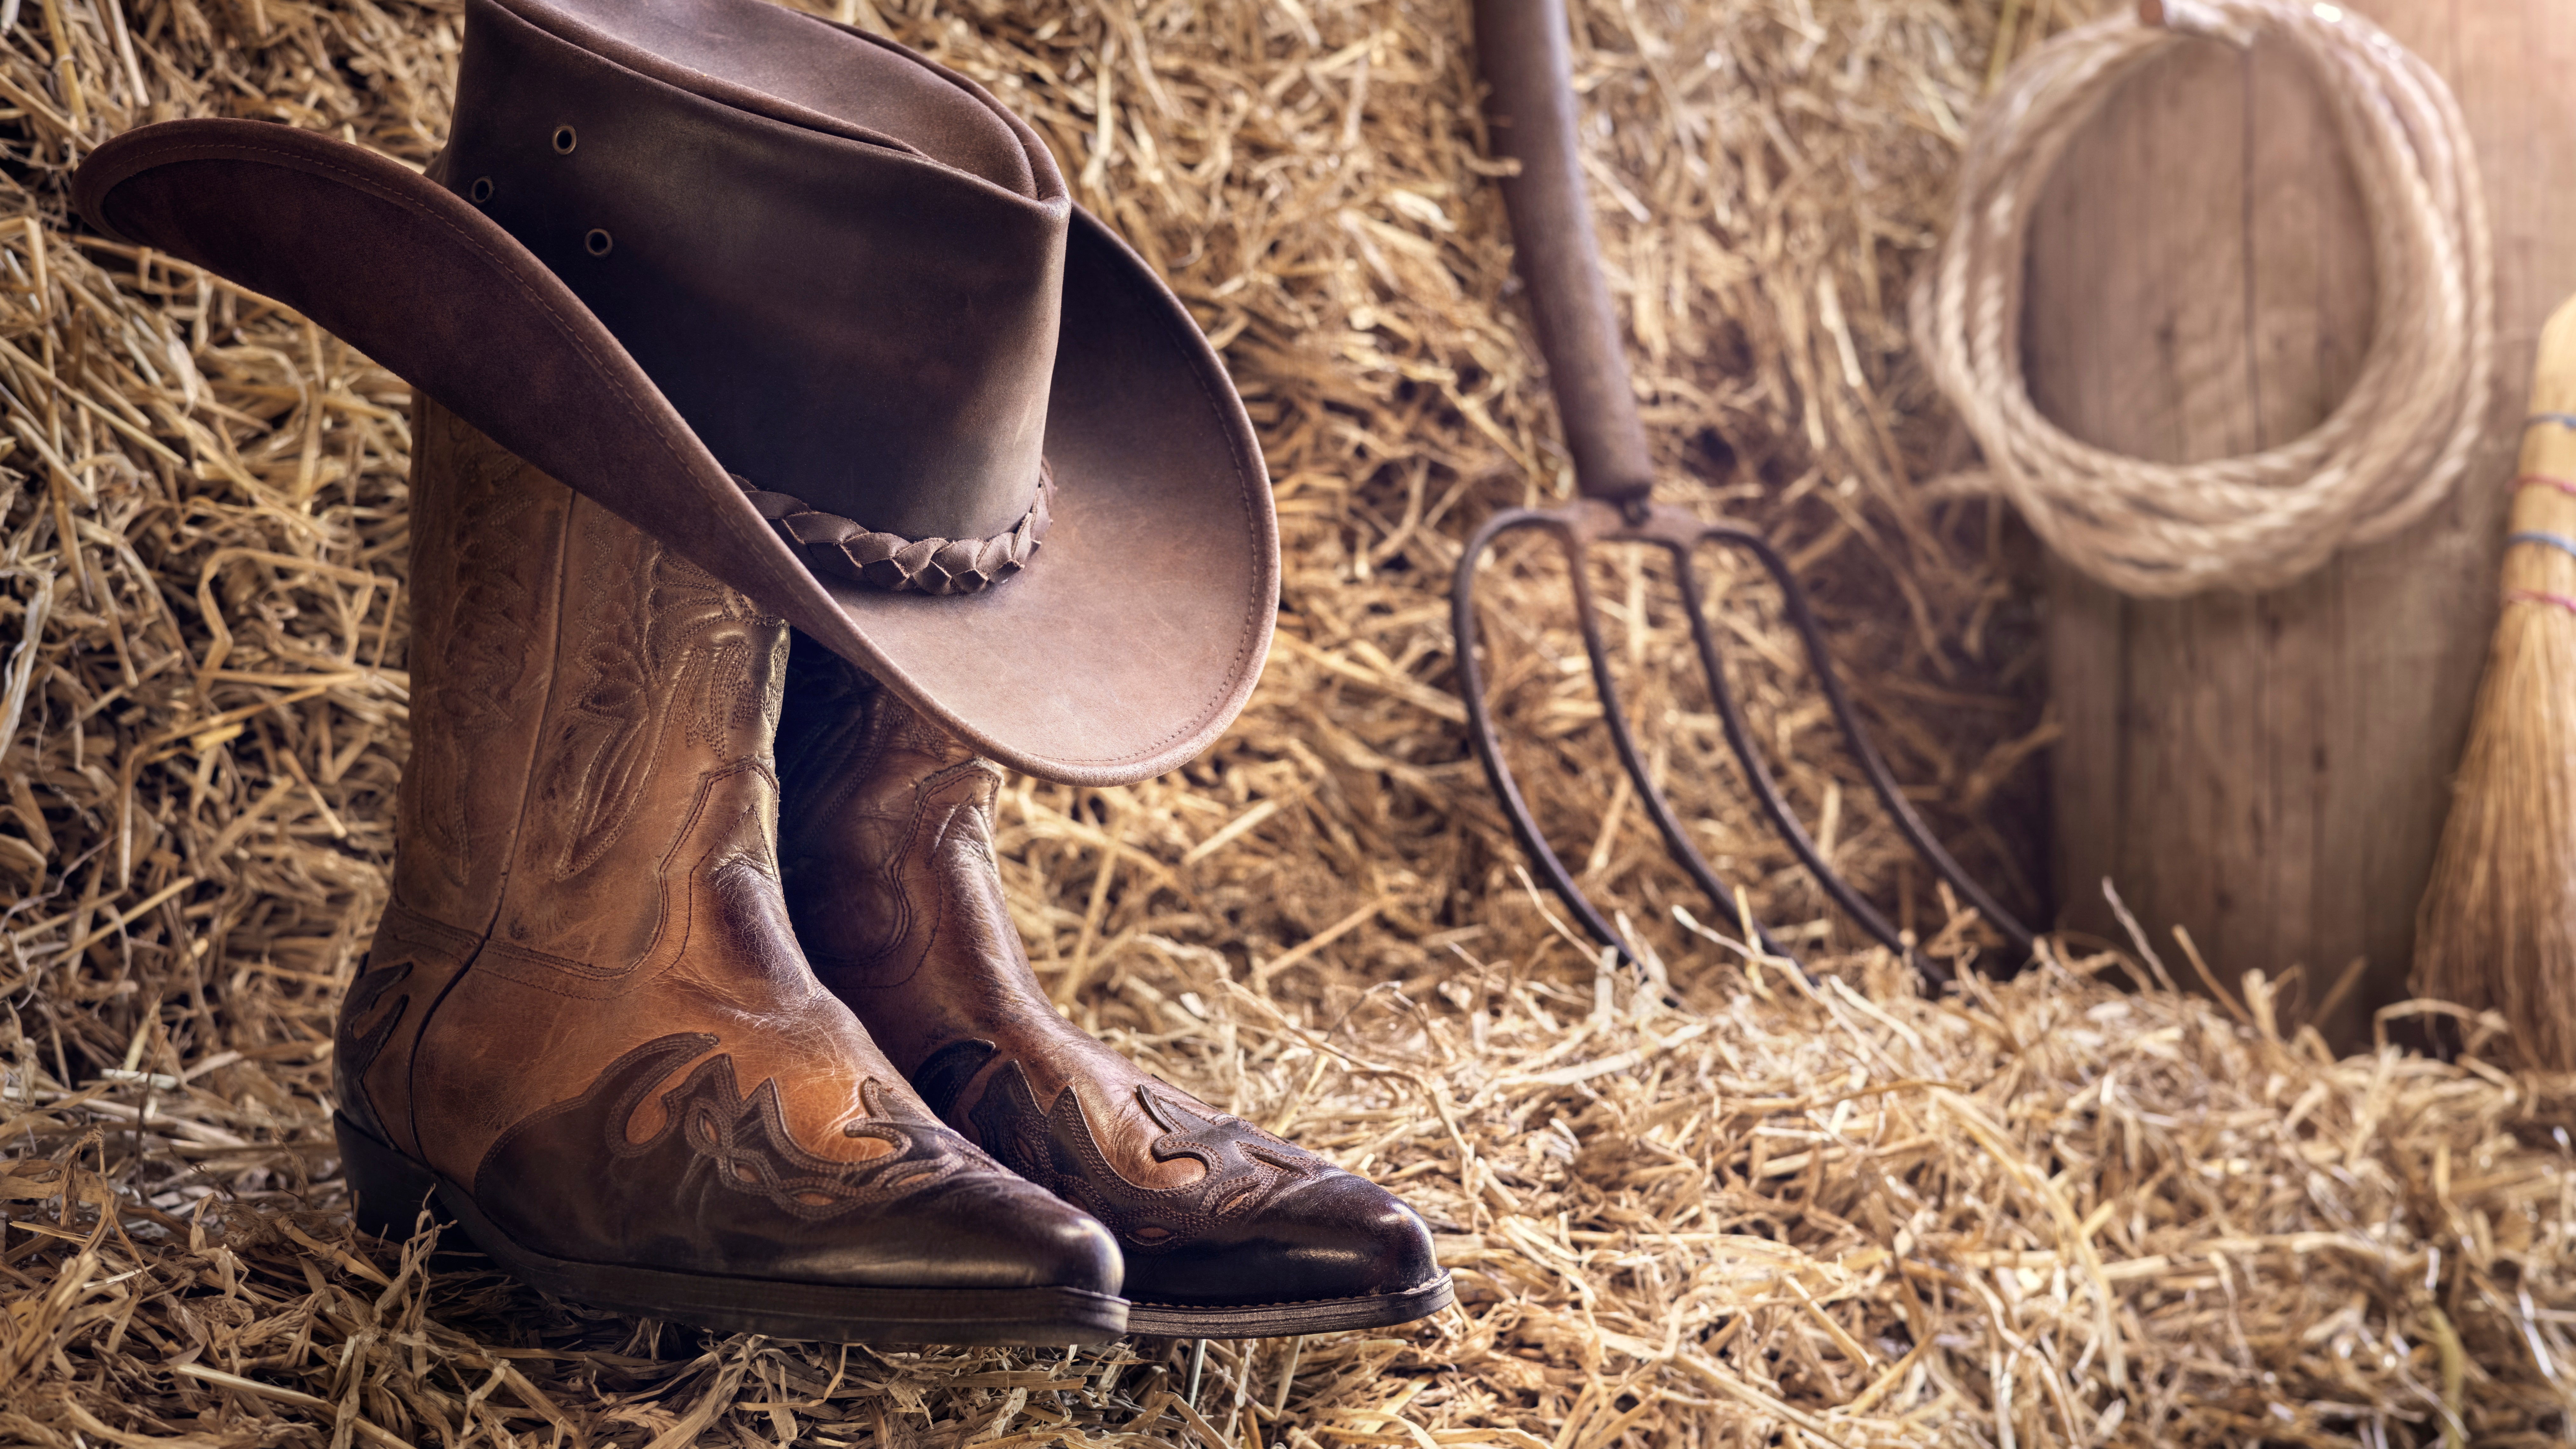 America's Most Coveted Icon - Boot Barn Shares the Story of the